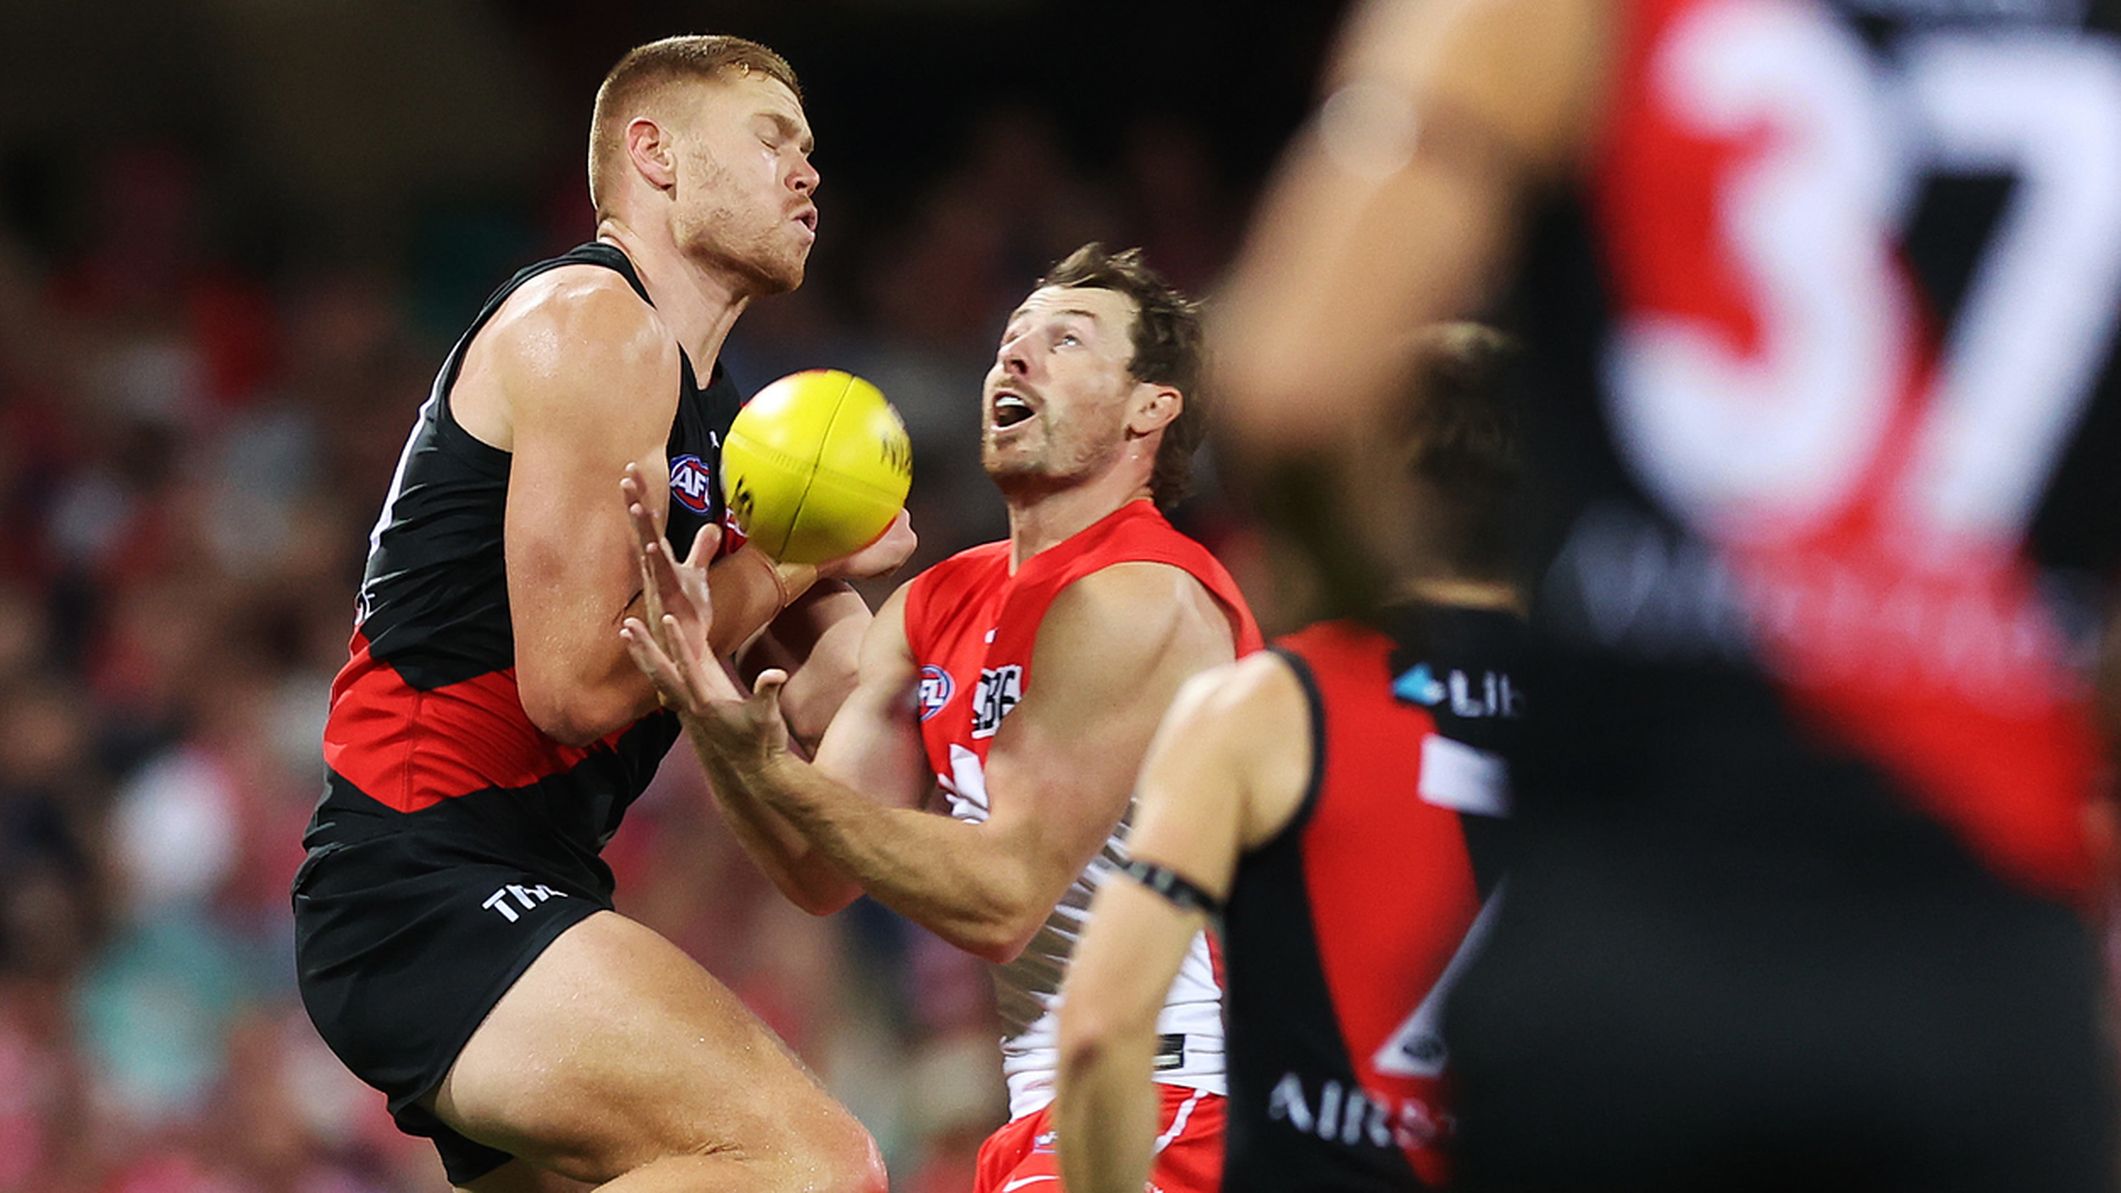 Bombers forward Peter Wright in hot water for 'unfortunate' head-high hit in loss to Swans